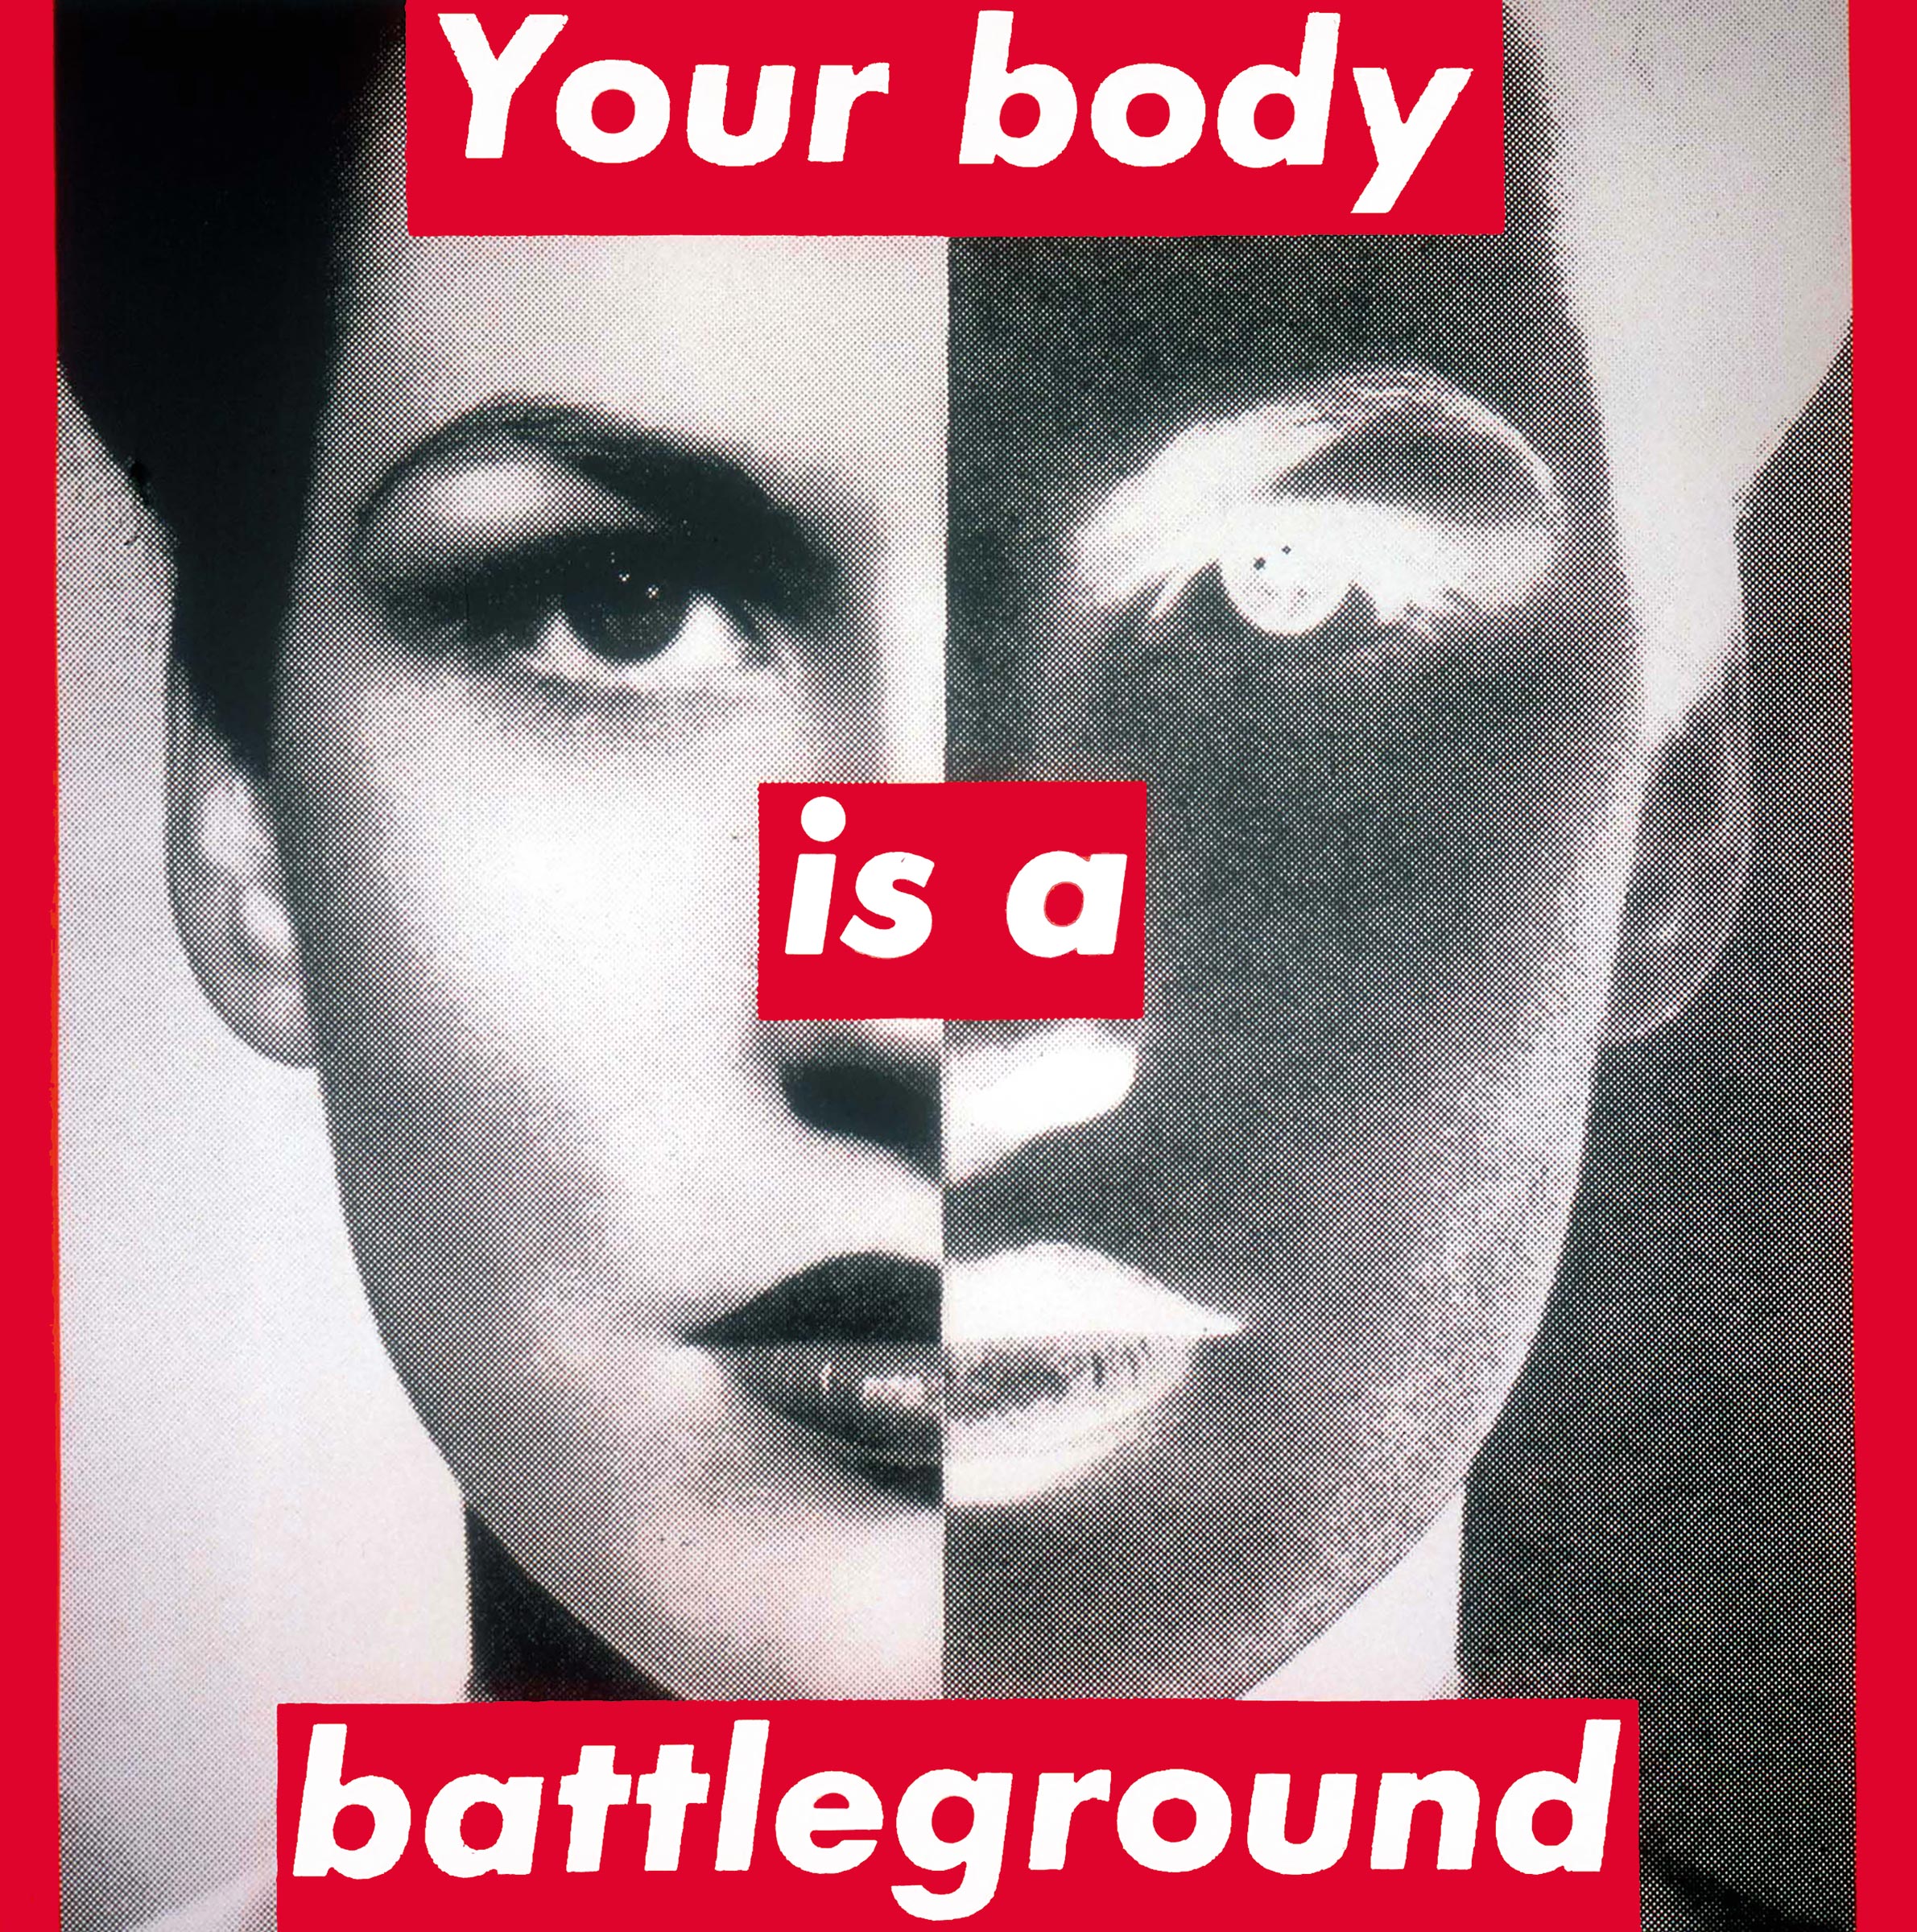 Barbara Kruger
                  Untitled (Your body is a battleground), 1989
                  Photographic silkscreen on vinyl
                  284.5 × 284.5 cm / 112 × 112 inches (Courtesy the artist, The Broad Art Foundation and
                  Sprüth Magers)